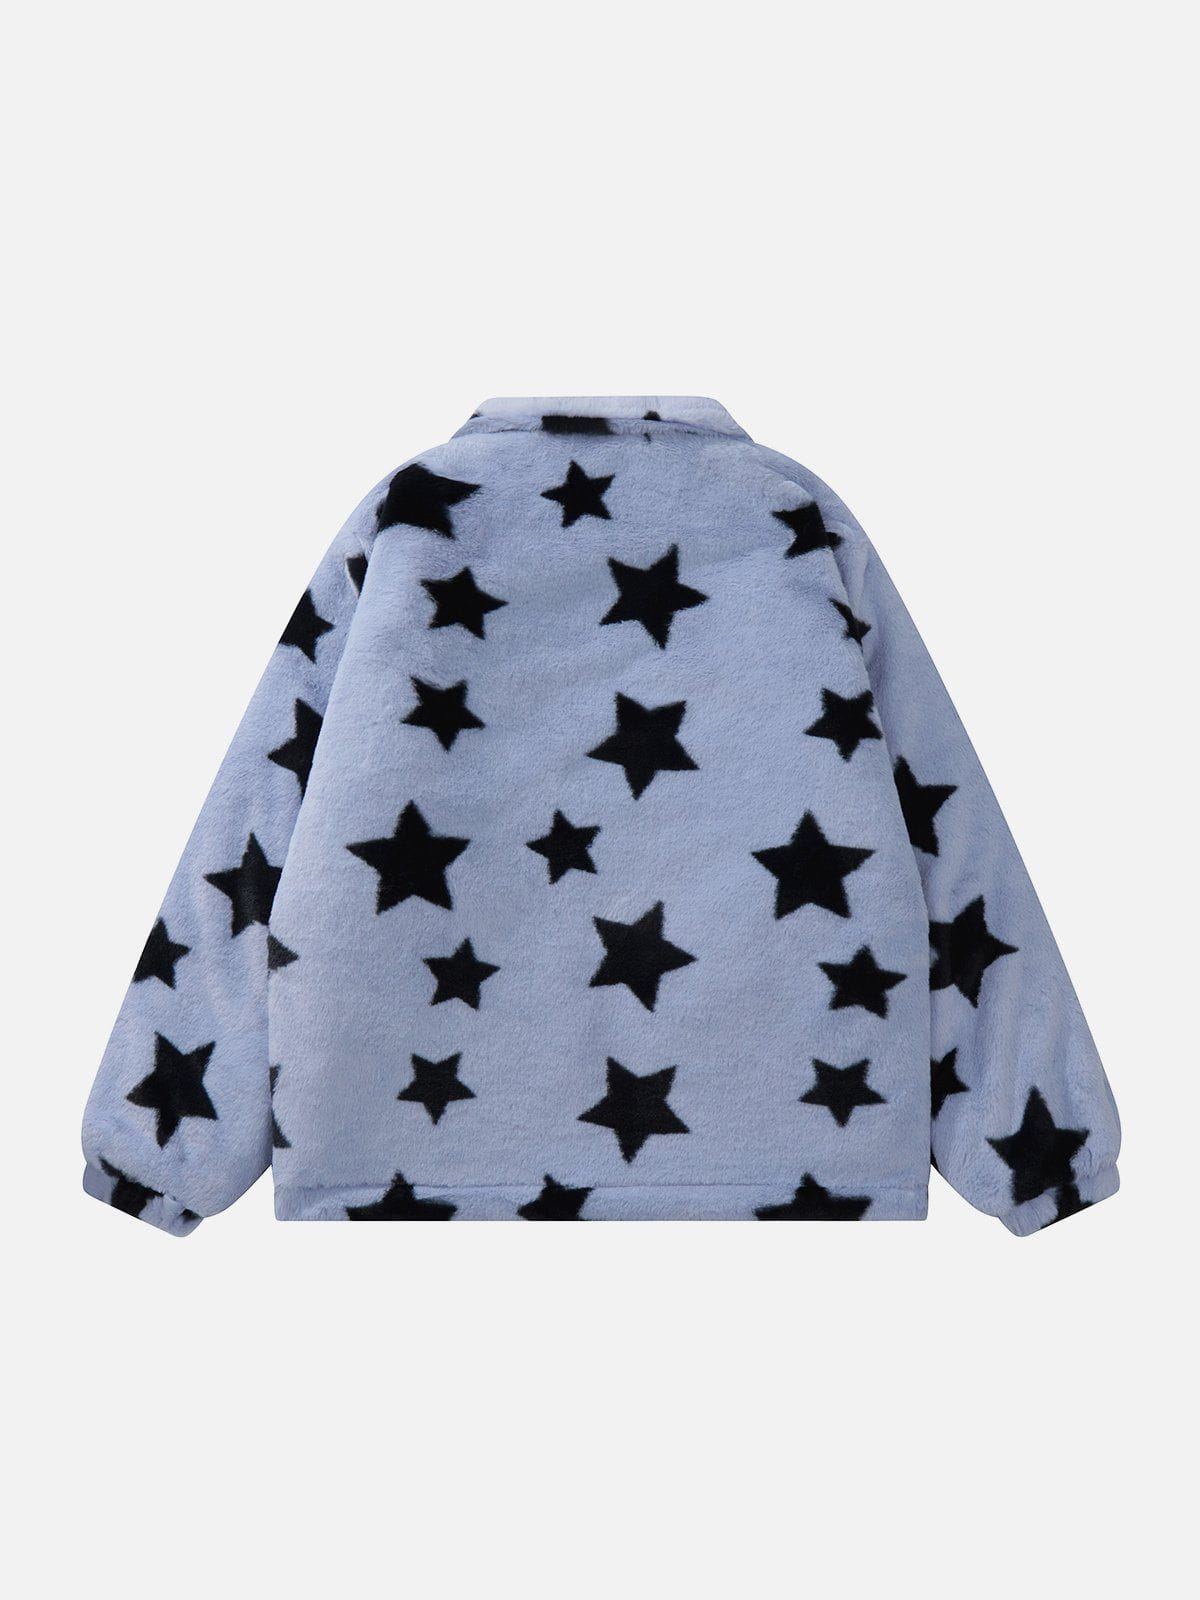 LUXENFY™ - Oversized Star Print Reversible Sherpa Coat luxenfy.com